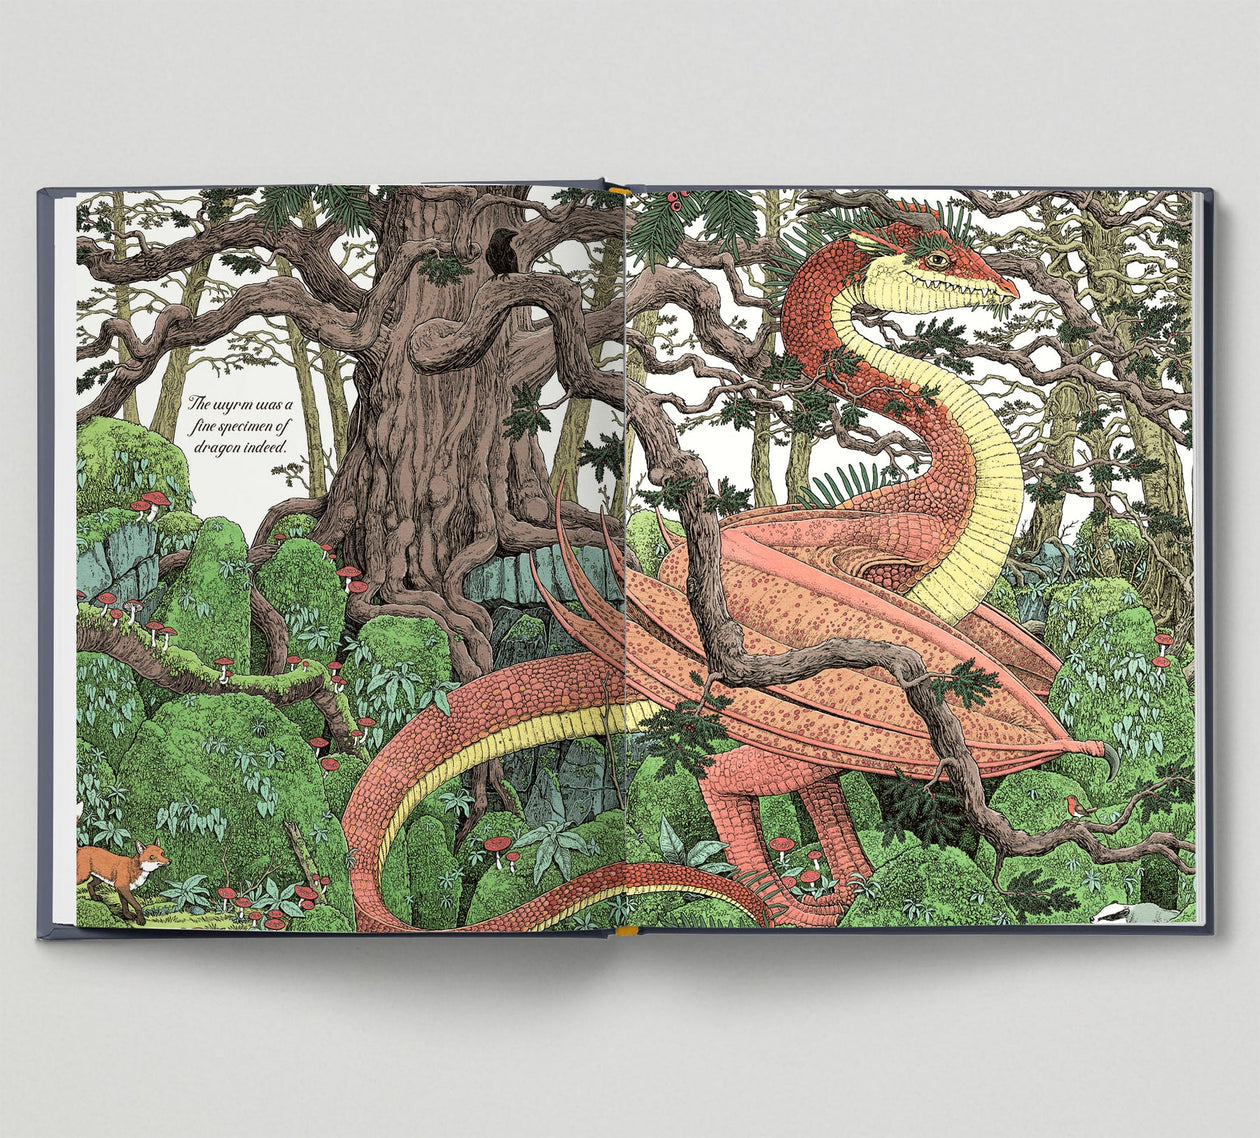 Curatoria Draconis: Dragon Lore, illustrated by Tomislav Tomic